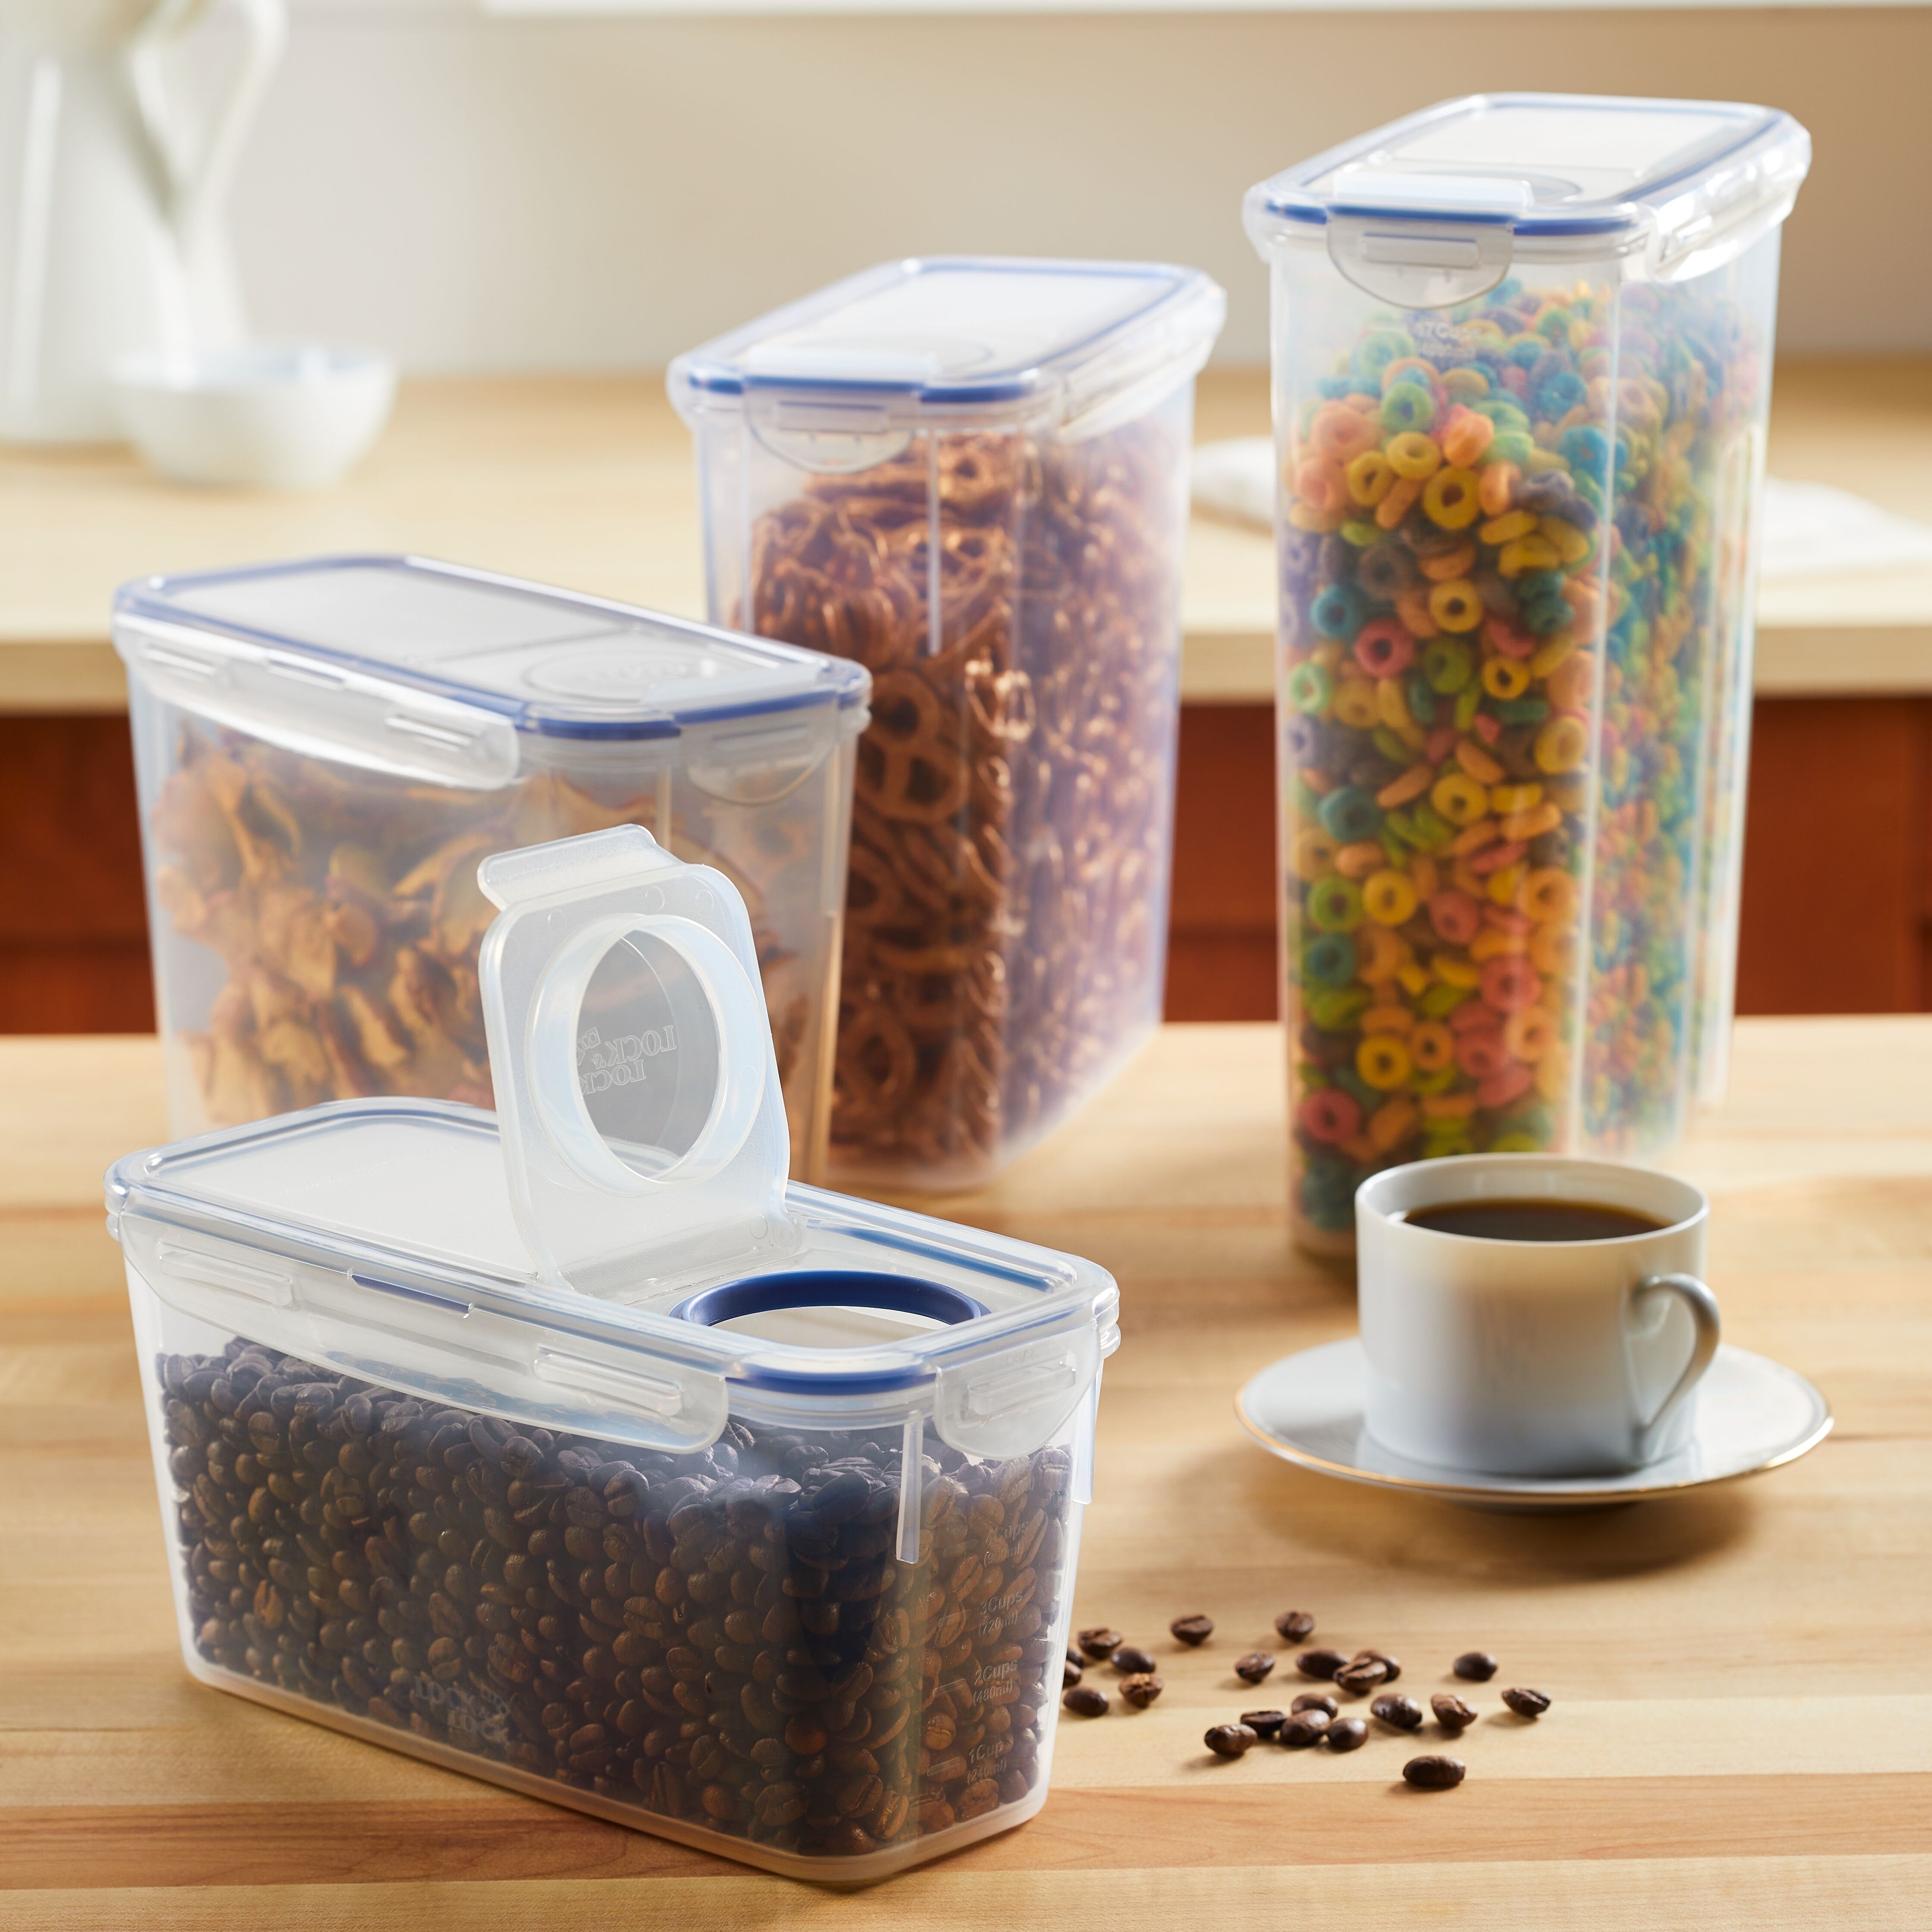 https://ak1.ostkcdn.com/images/products/is/images/direct/3f43e293cab100c0f532f0887682fb16e5b2dd0e/LocknLock-Pantry-Food-Storage-Container-Set%2C-10-Piece.jpg